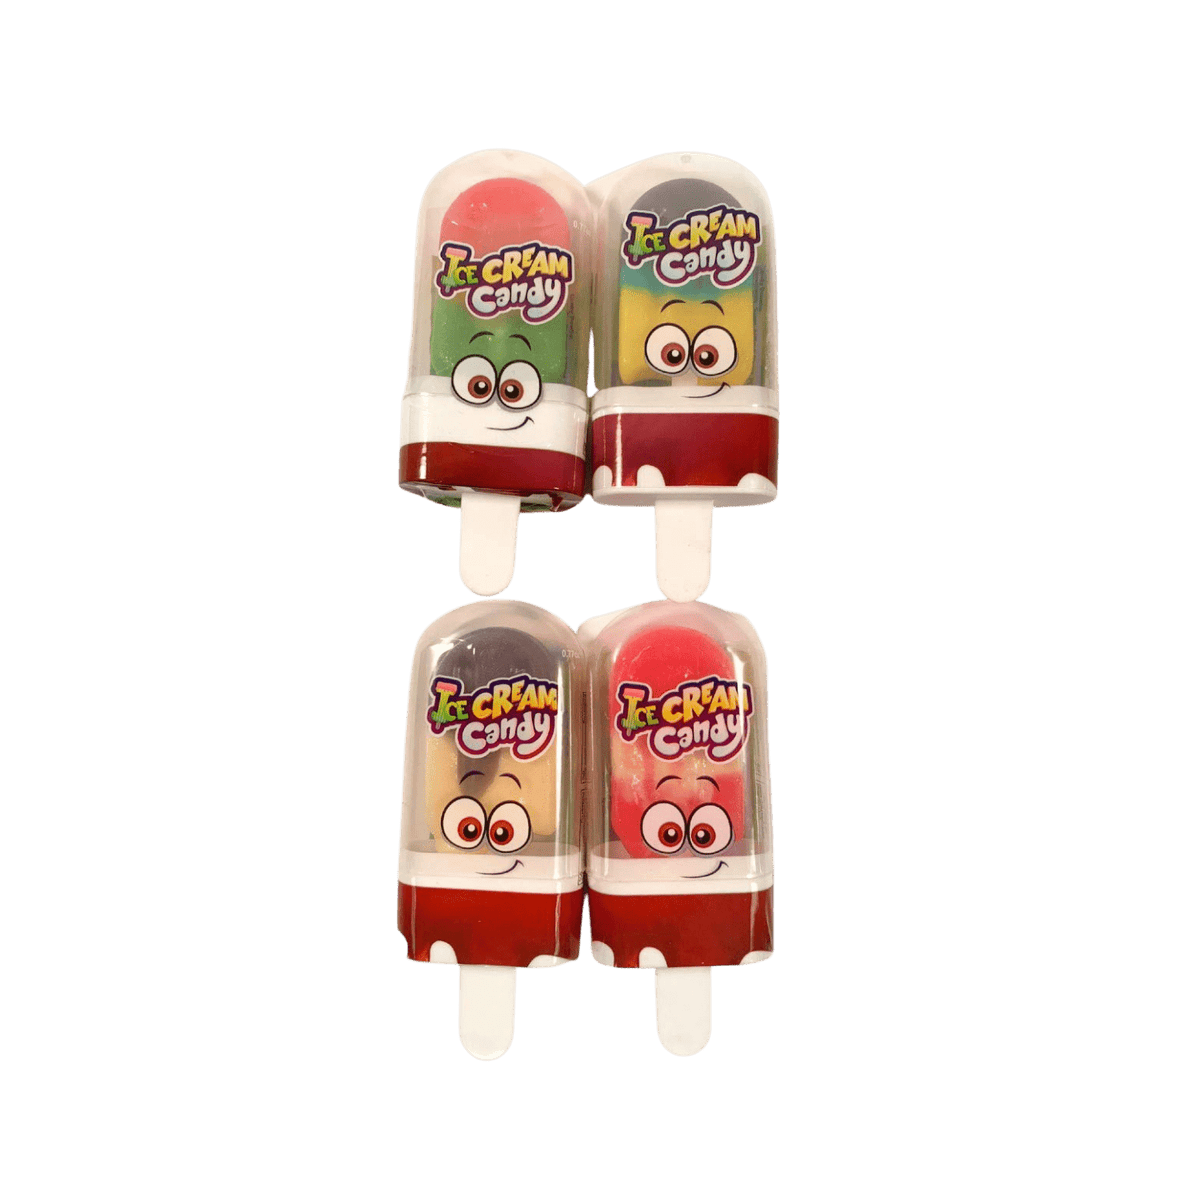 Lolli and Pops Novelty Raindrops Ice Cream Candy Pop